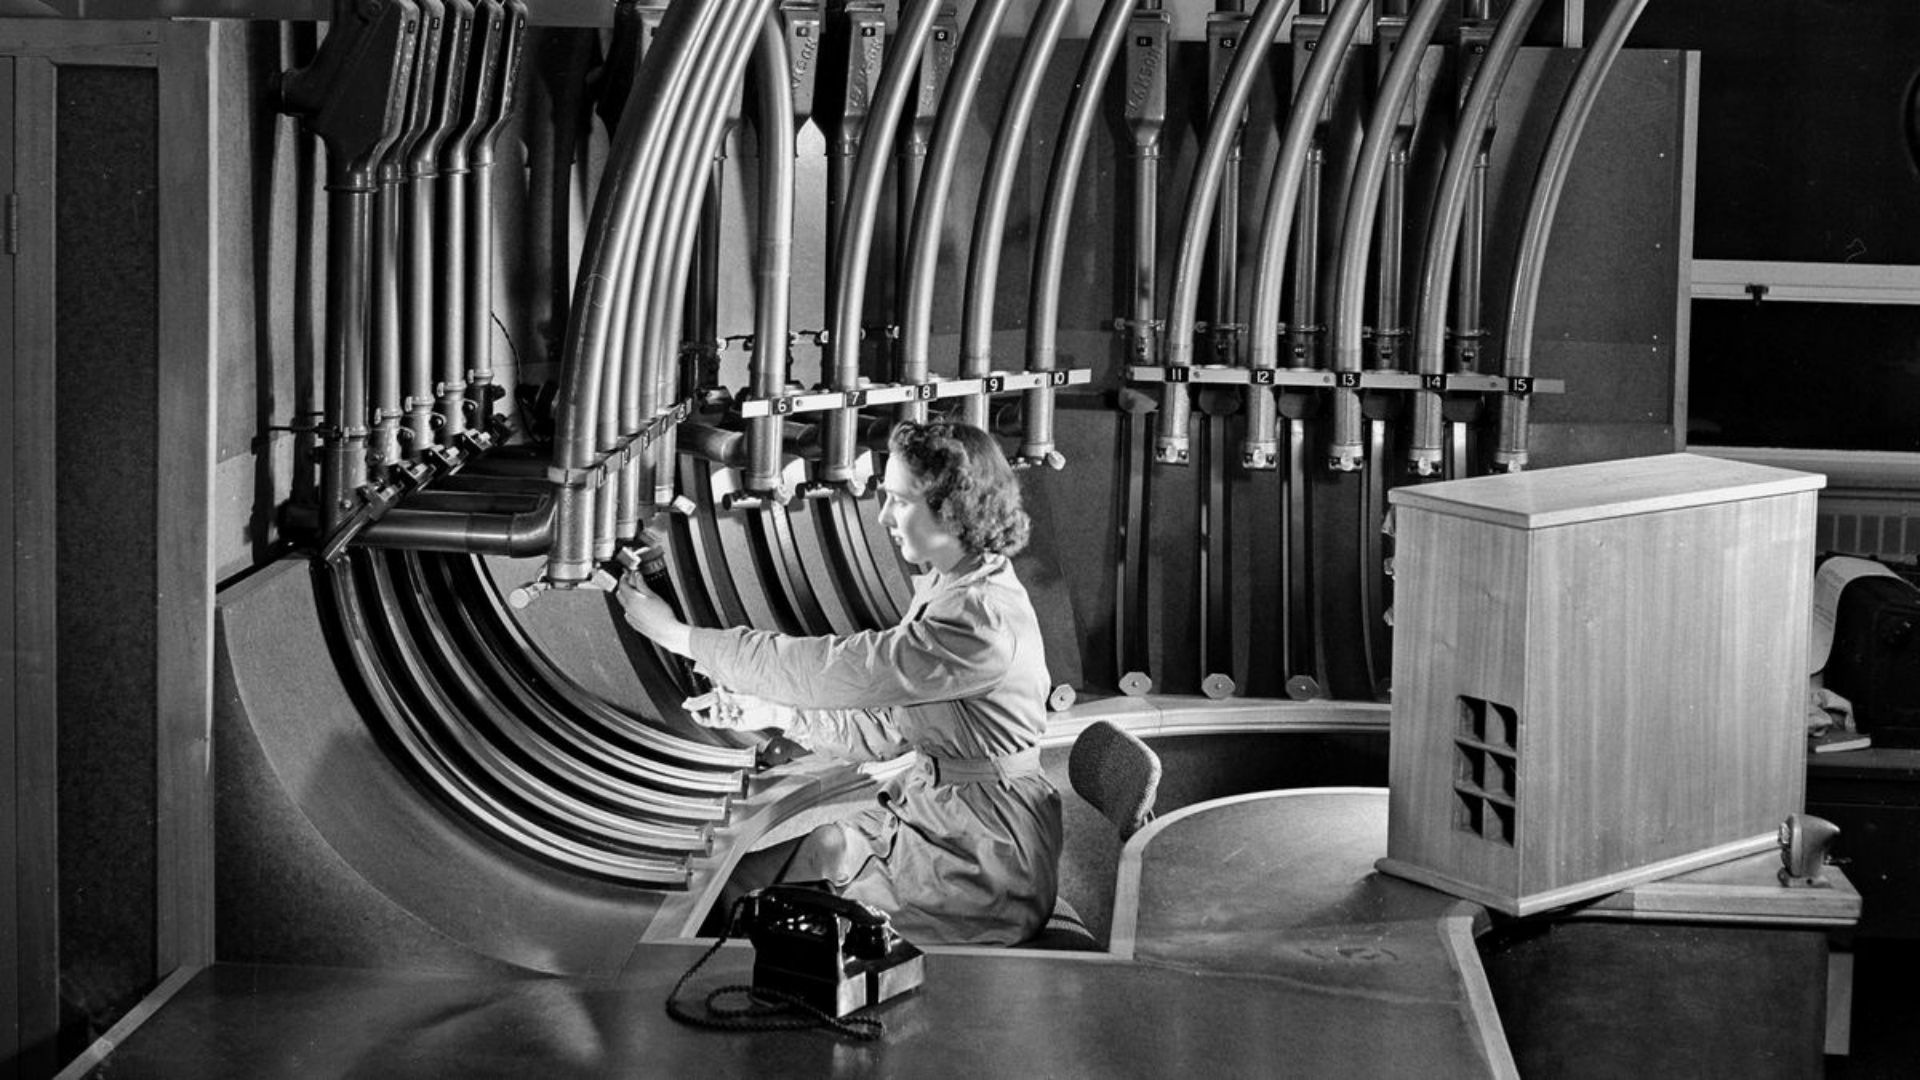 Pneumatic tubes at the Plaza hotel in 1941. (Getty Images)